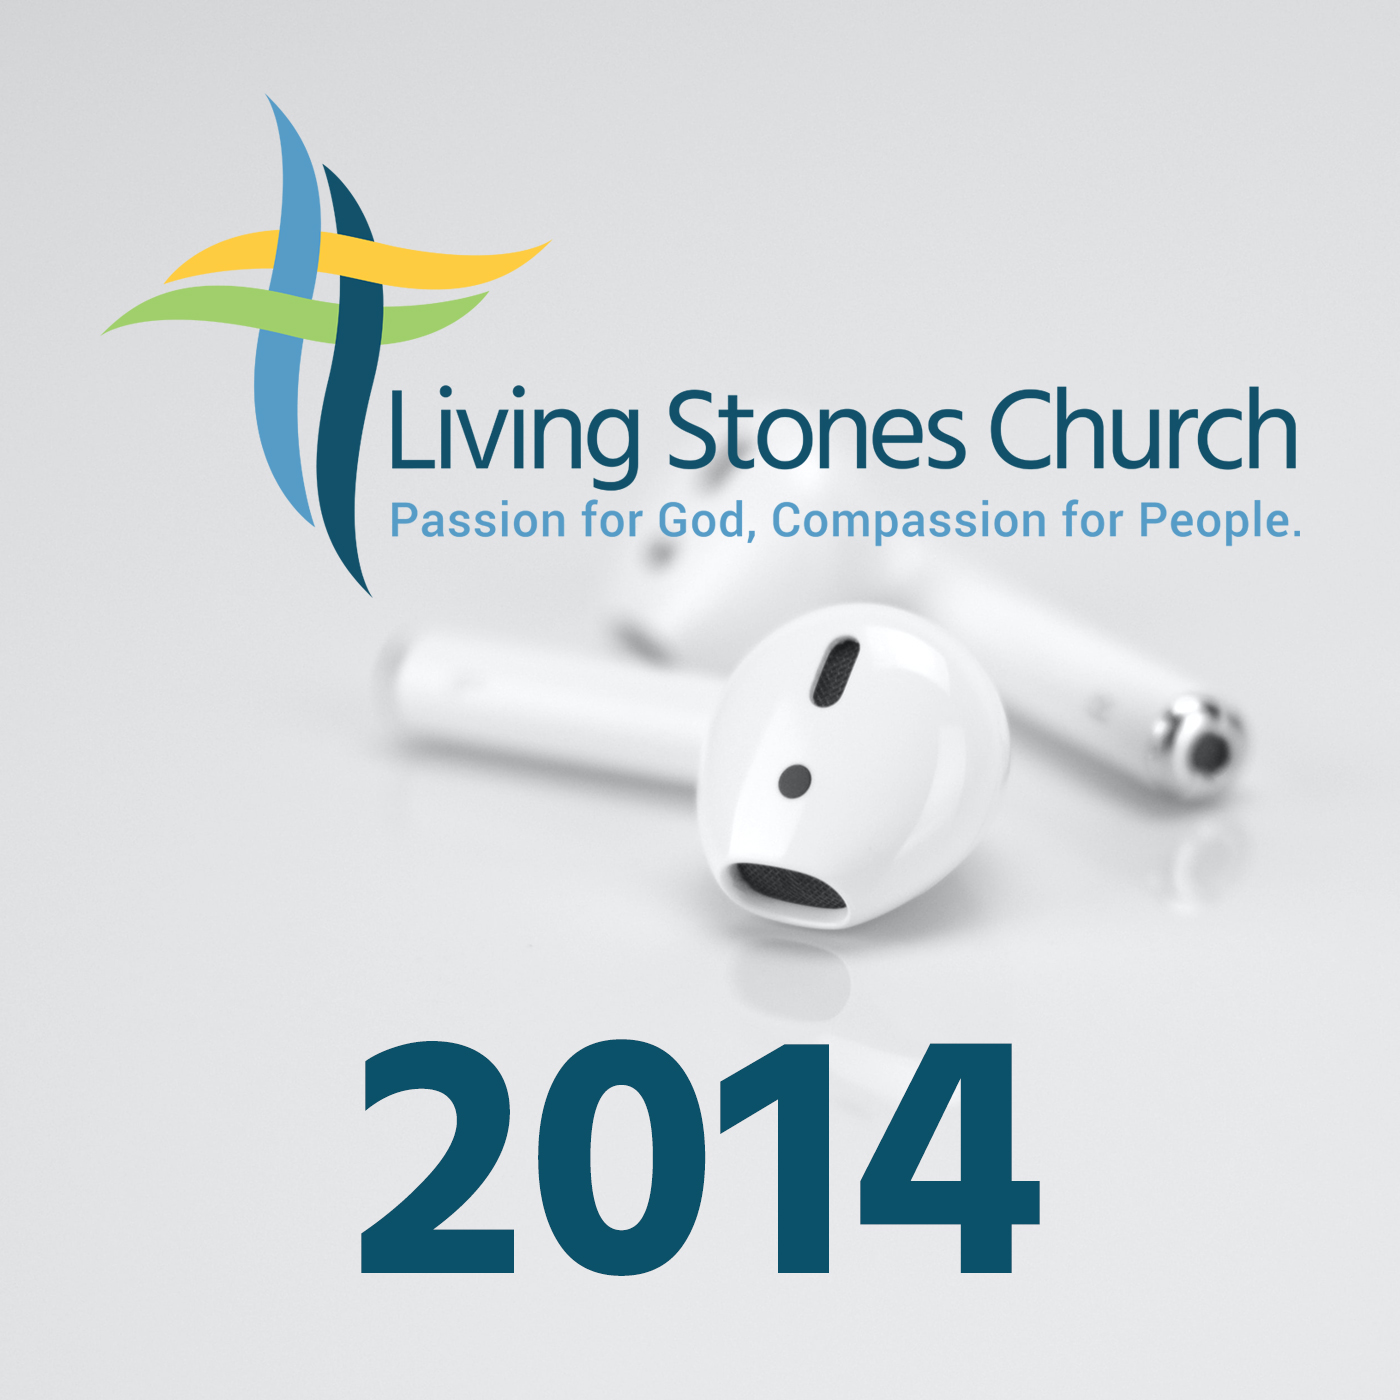 Rethinking Missions - Pastor Amy Crocker - March 9, 2014